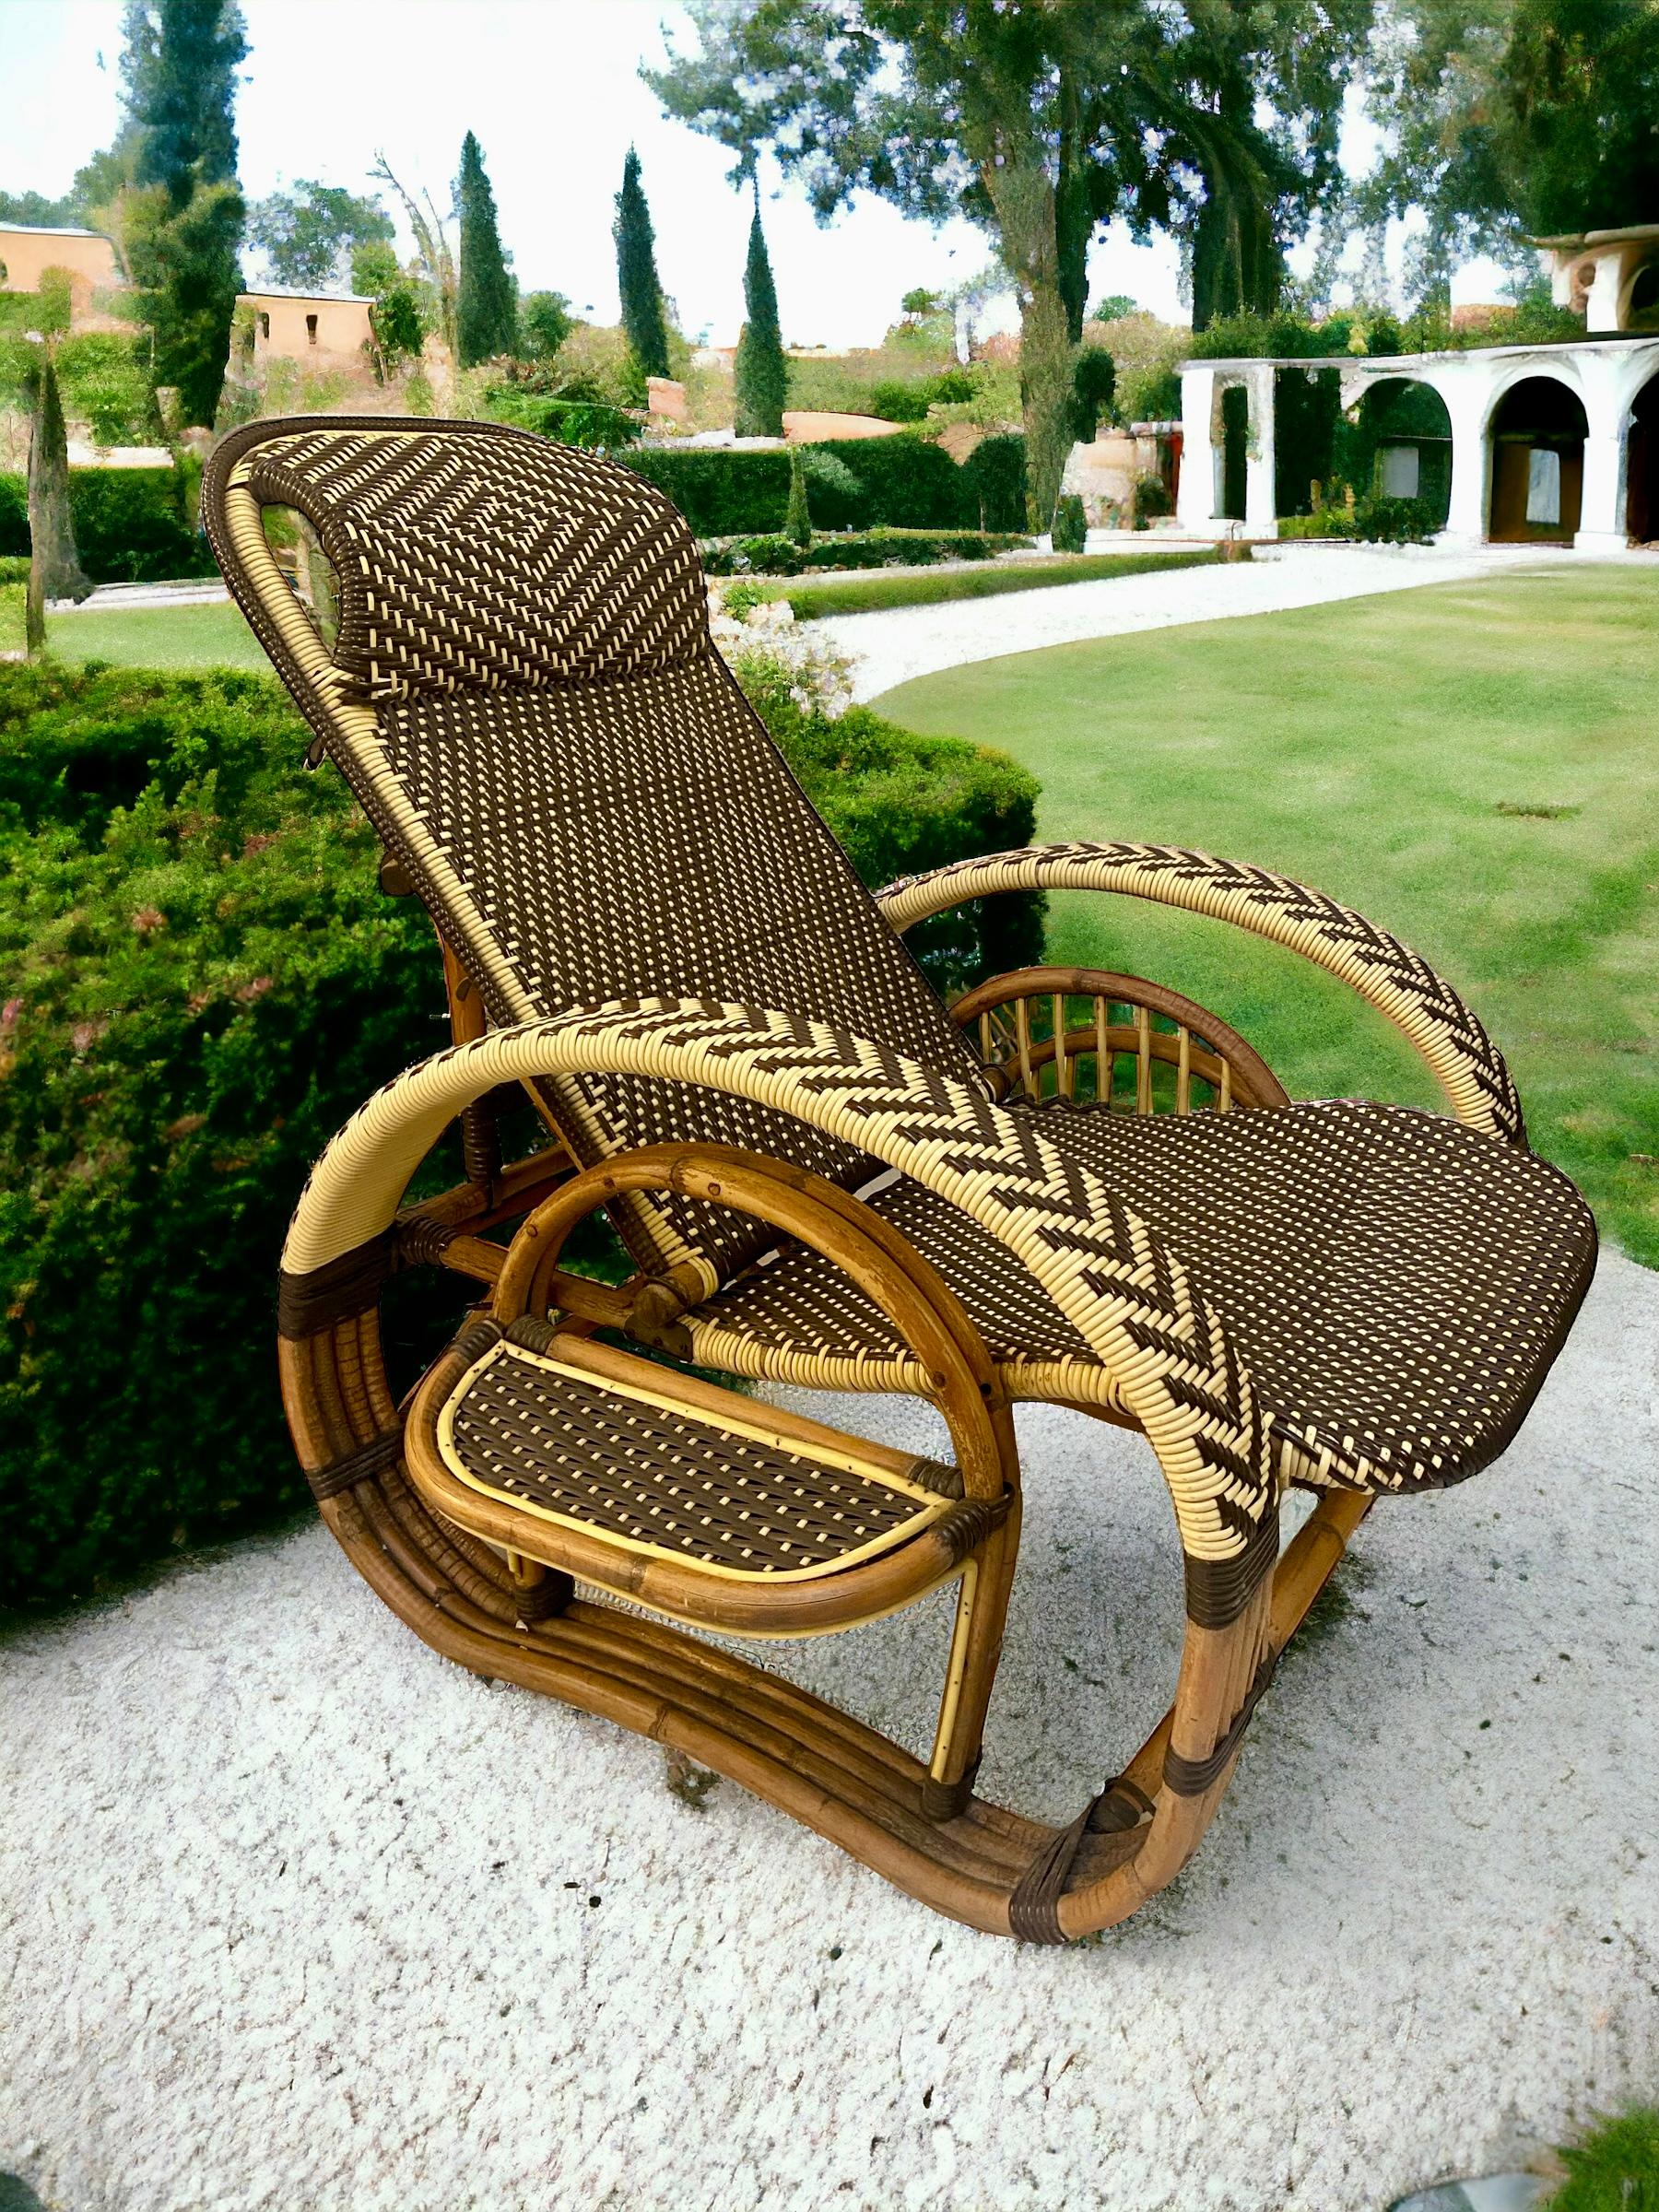 Original Mid-Century Modern reclinable Bamboo and Rattan three -stand lounge chair features stylized pretzel arms.
 It has a wonderful design with a classic look. Providing comfort and usability with the Paul Frank style fitting many different areas